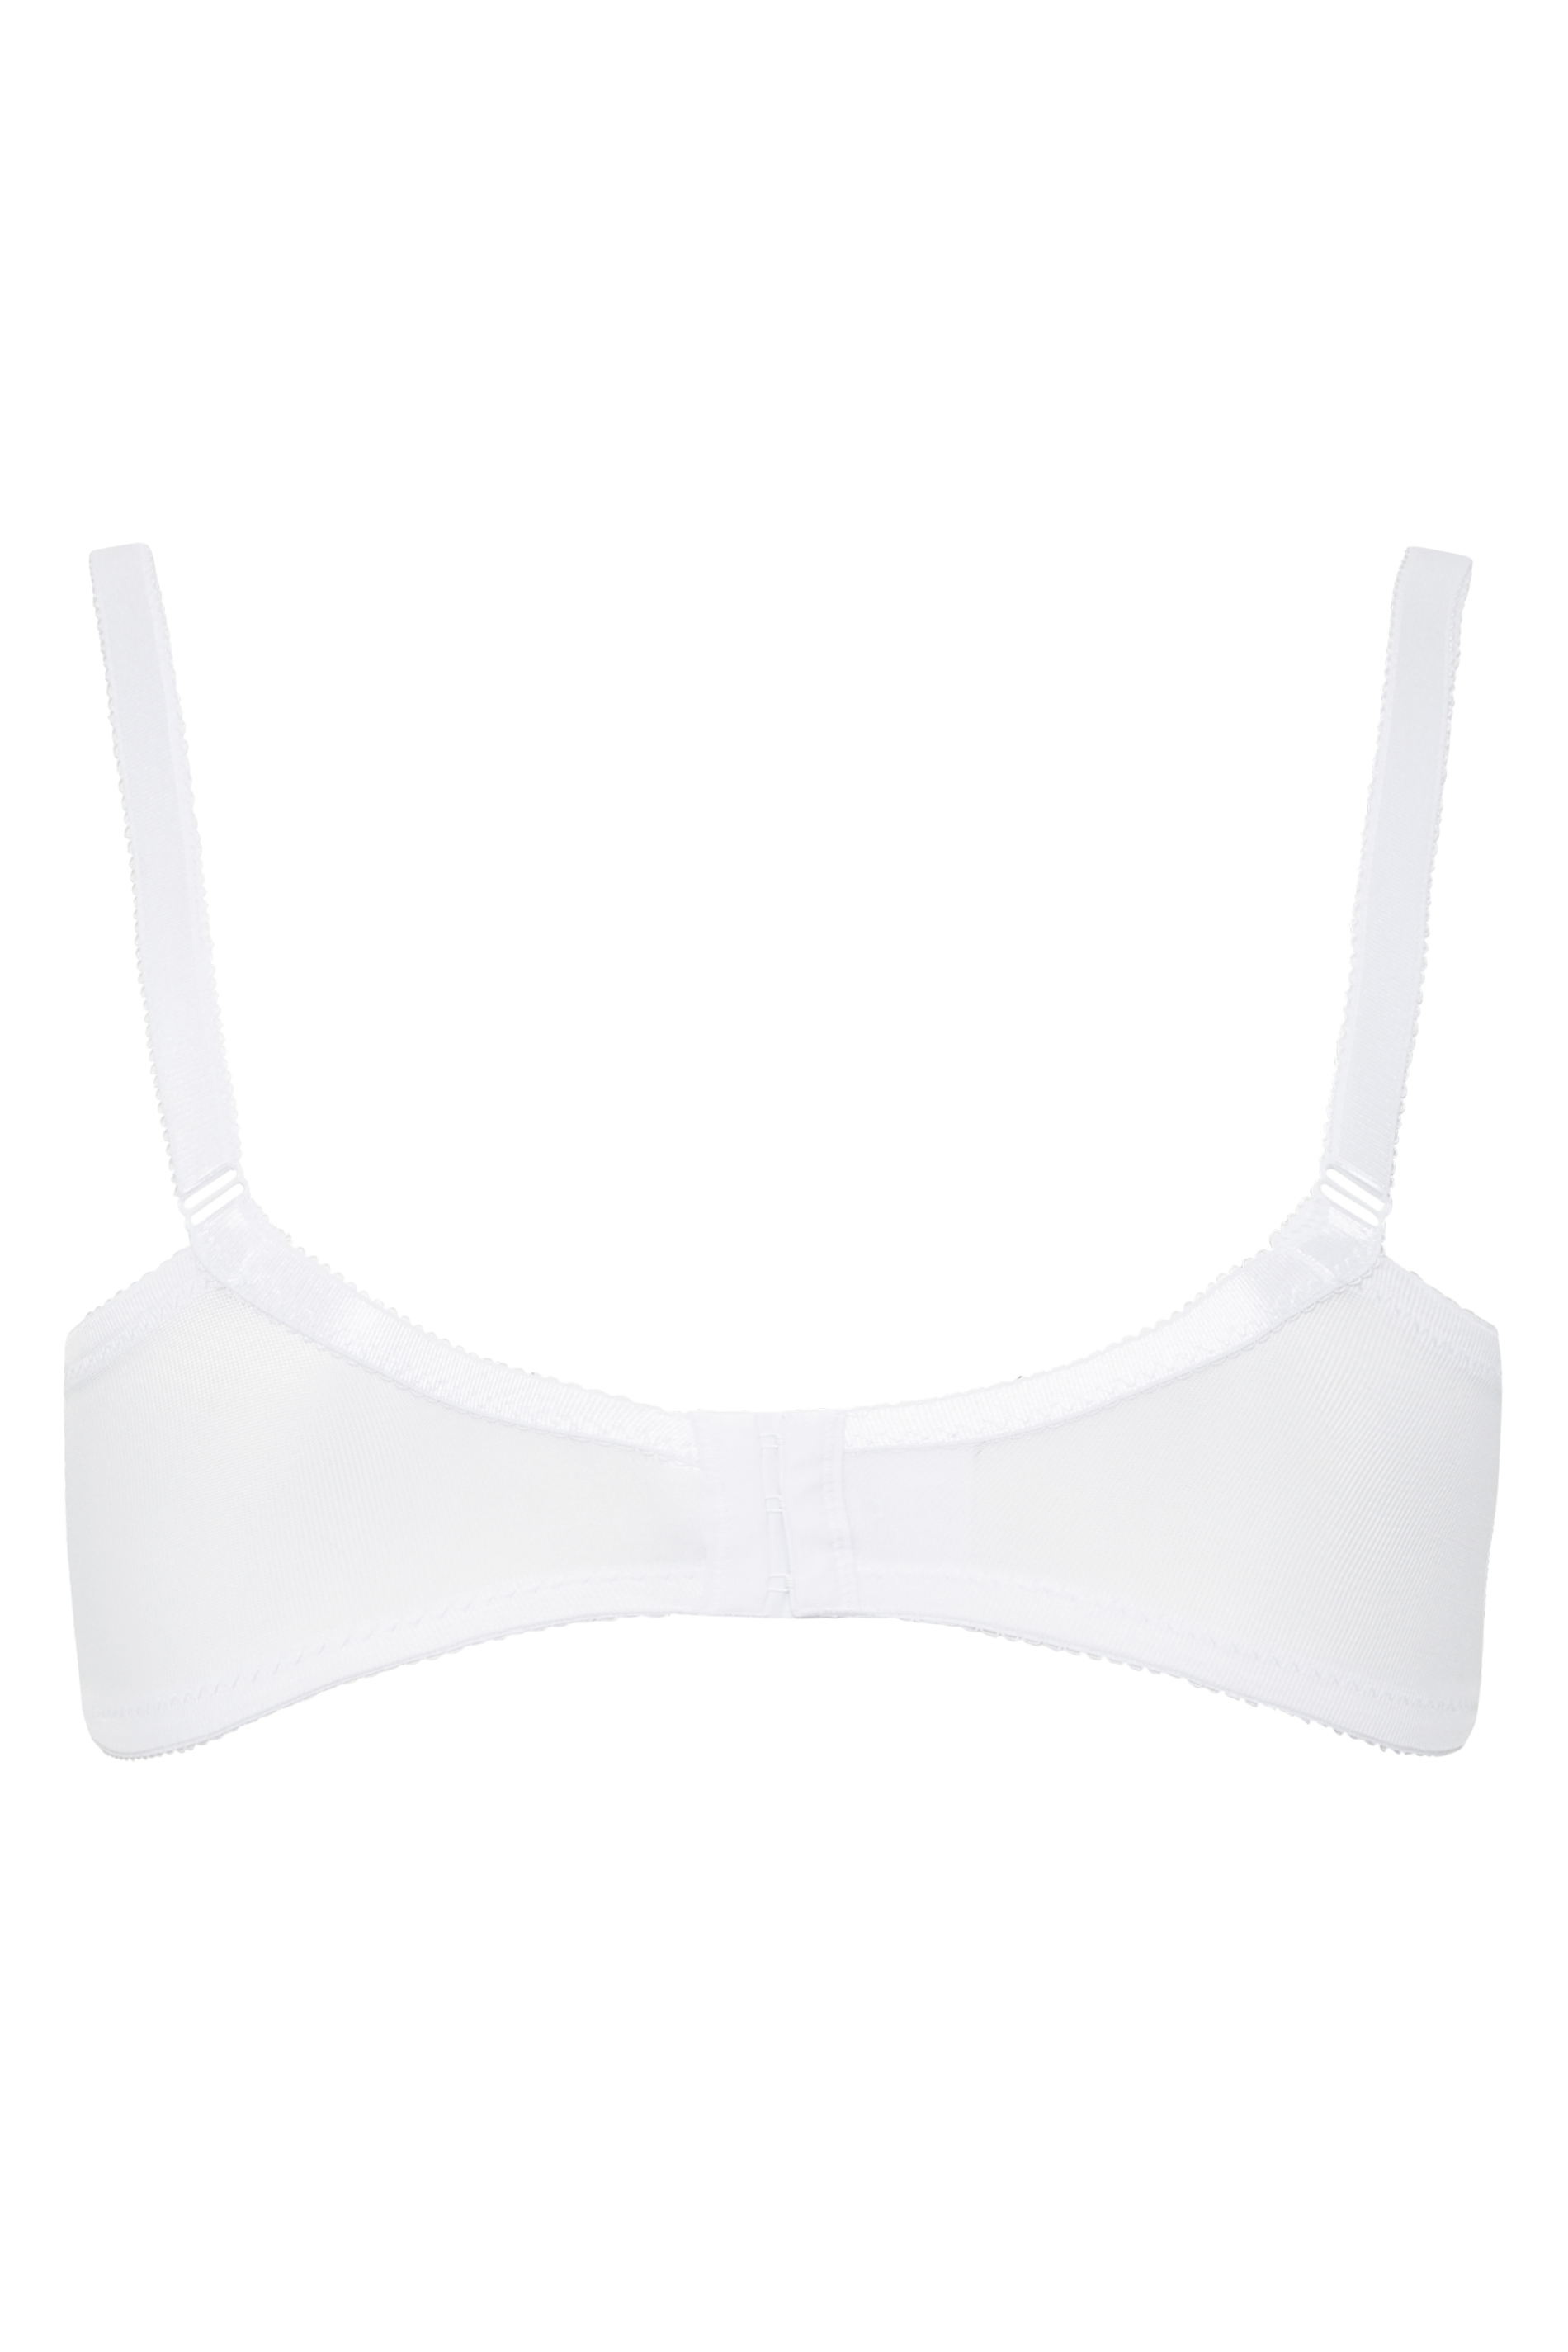 Buy Cup's-In - Women Cotton Non Padded Non-Wired Bra ( Pack of 2